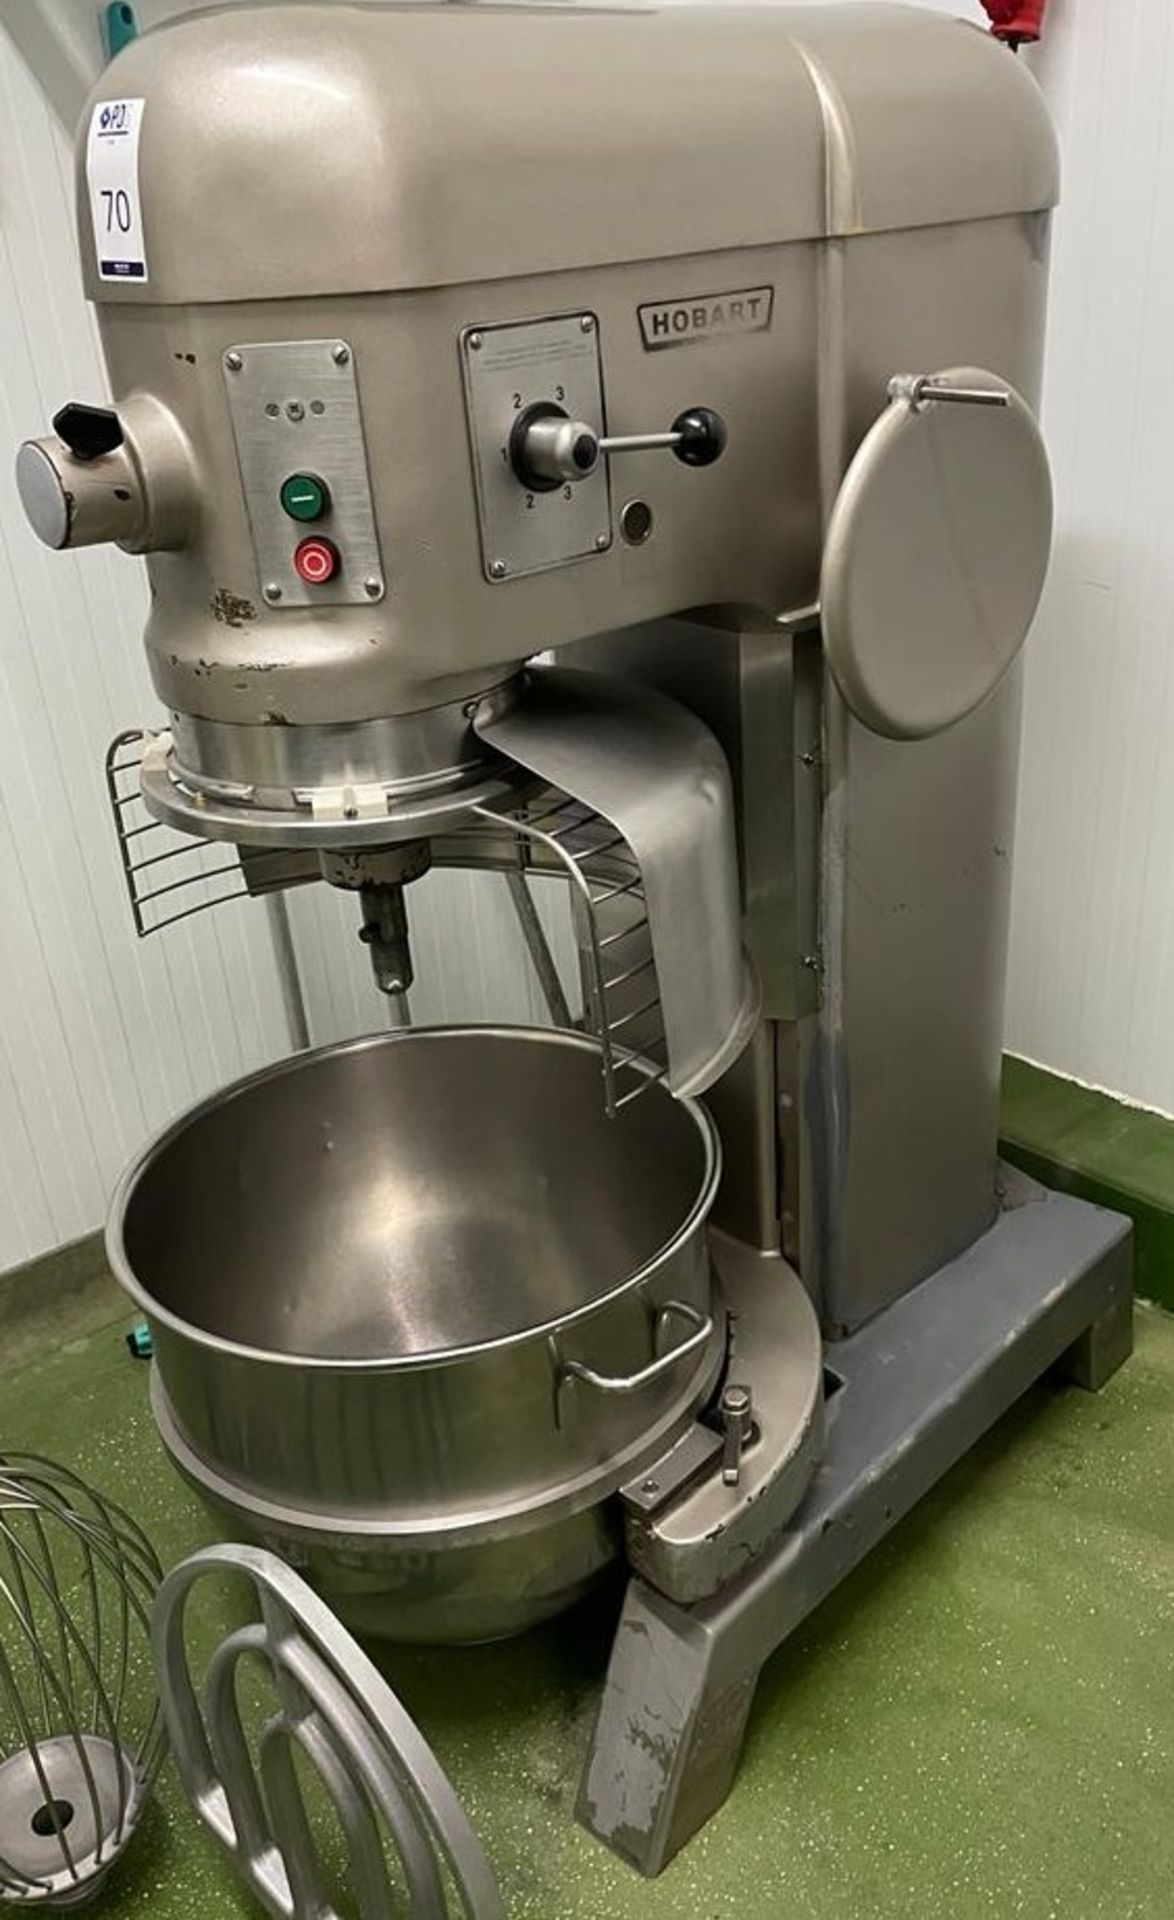 Hobart Model H800 Floor Standing Mixing Machine, Serial Number 97-0170-710, 400v (Location: NW - Image 2 of 2